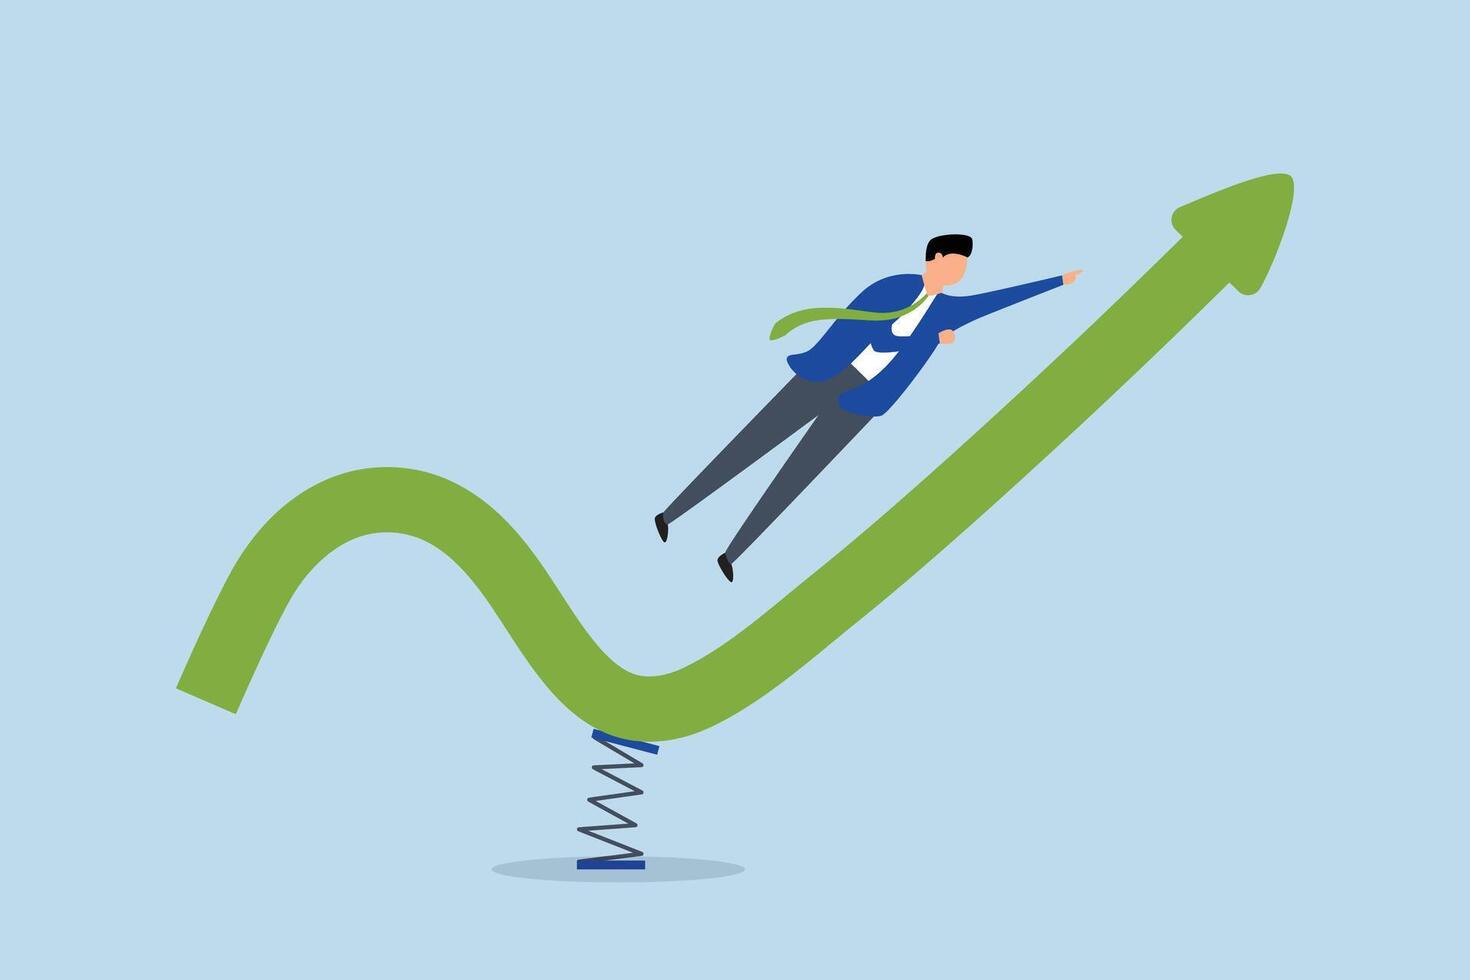 Stock market rebound, businessman jumping high on trampoline with green rising performance arrow chart vector